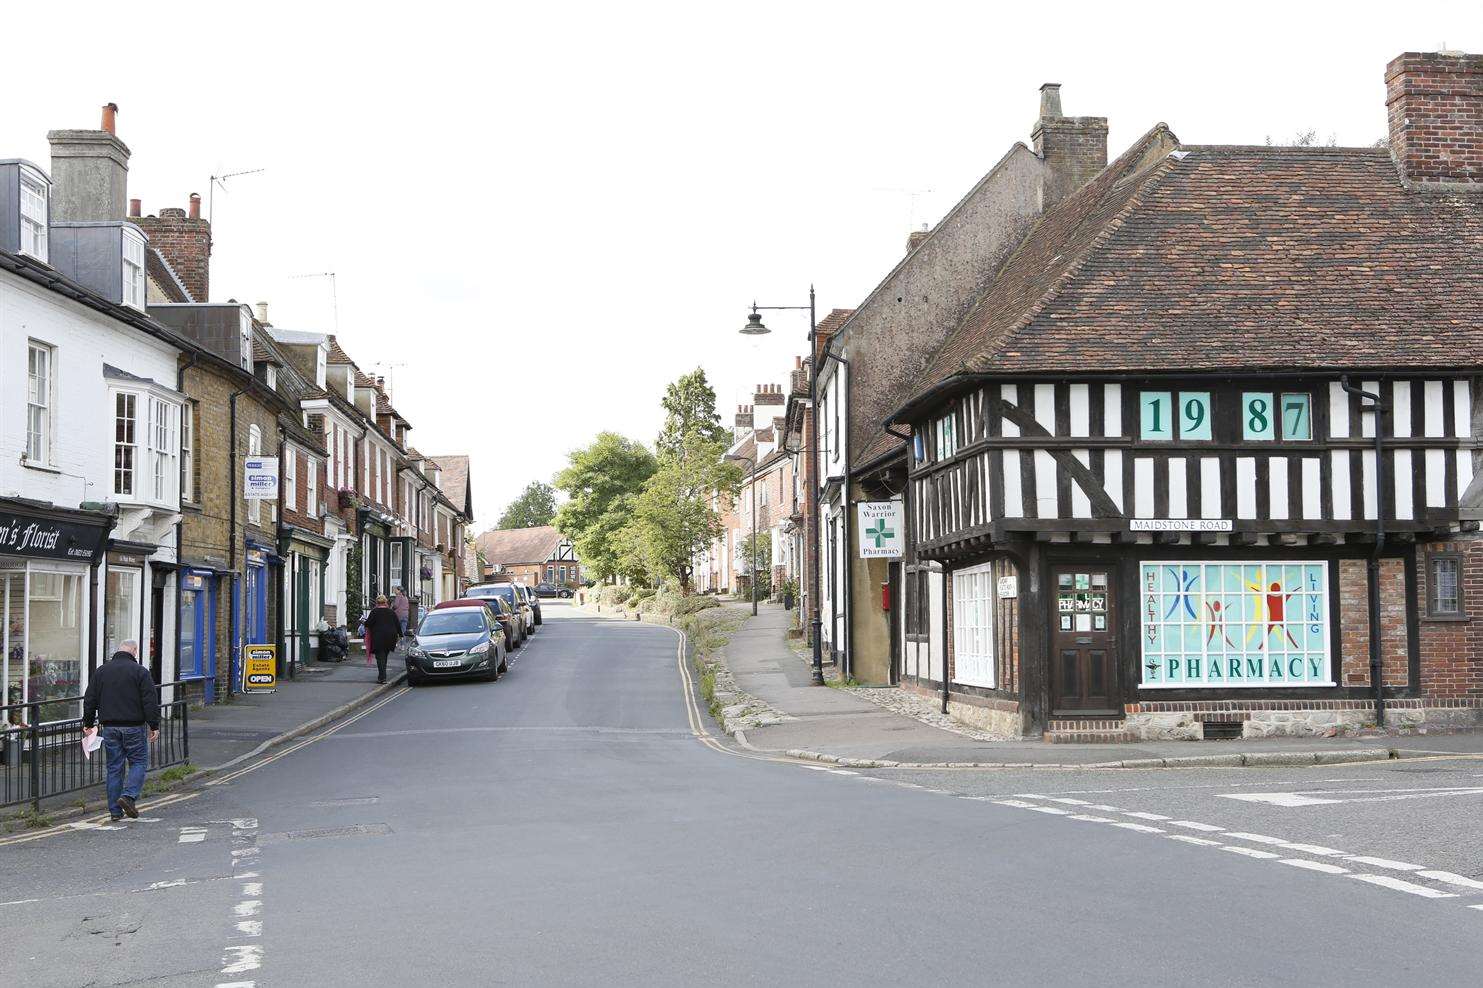 Lenham is a "jewel in the crown", say campaigners against the housing plans.